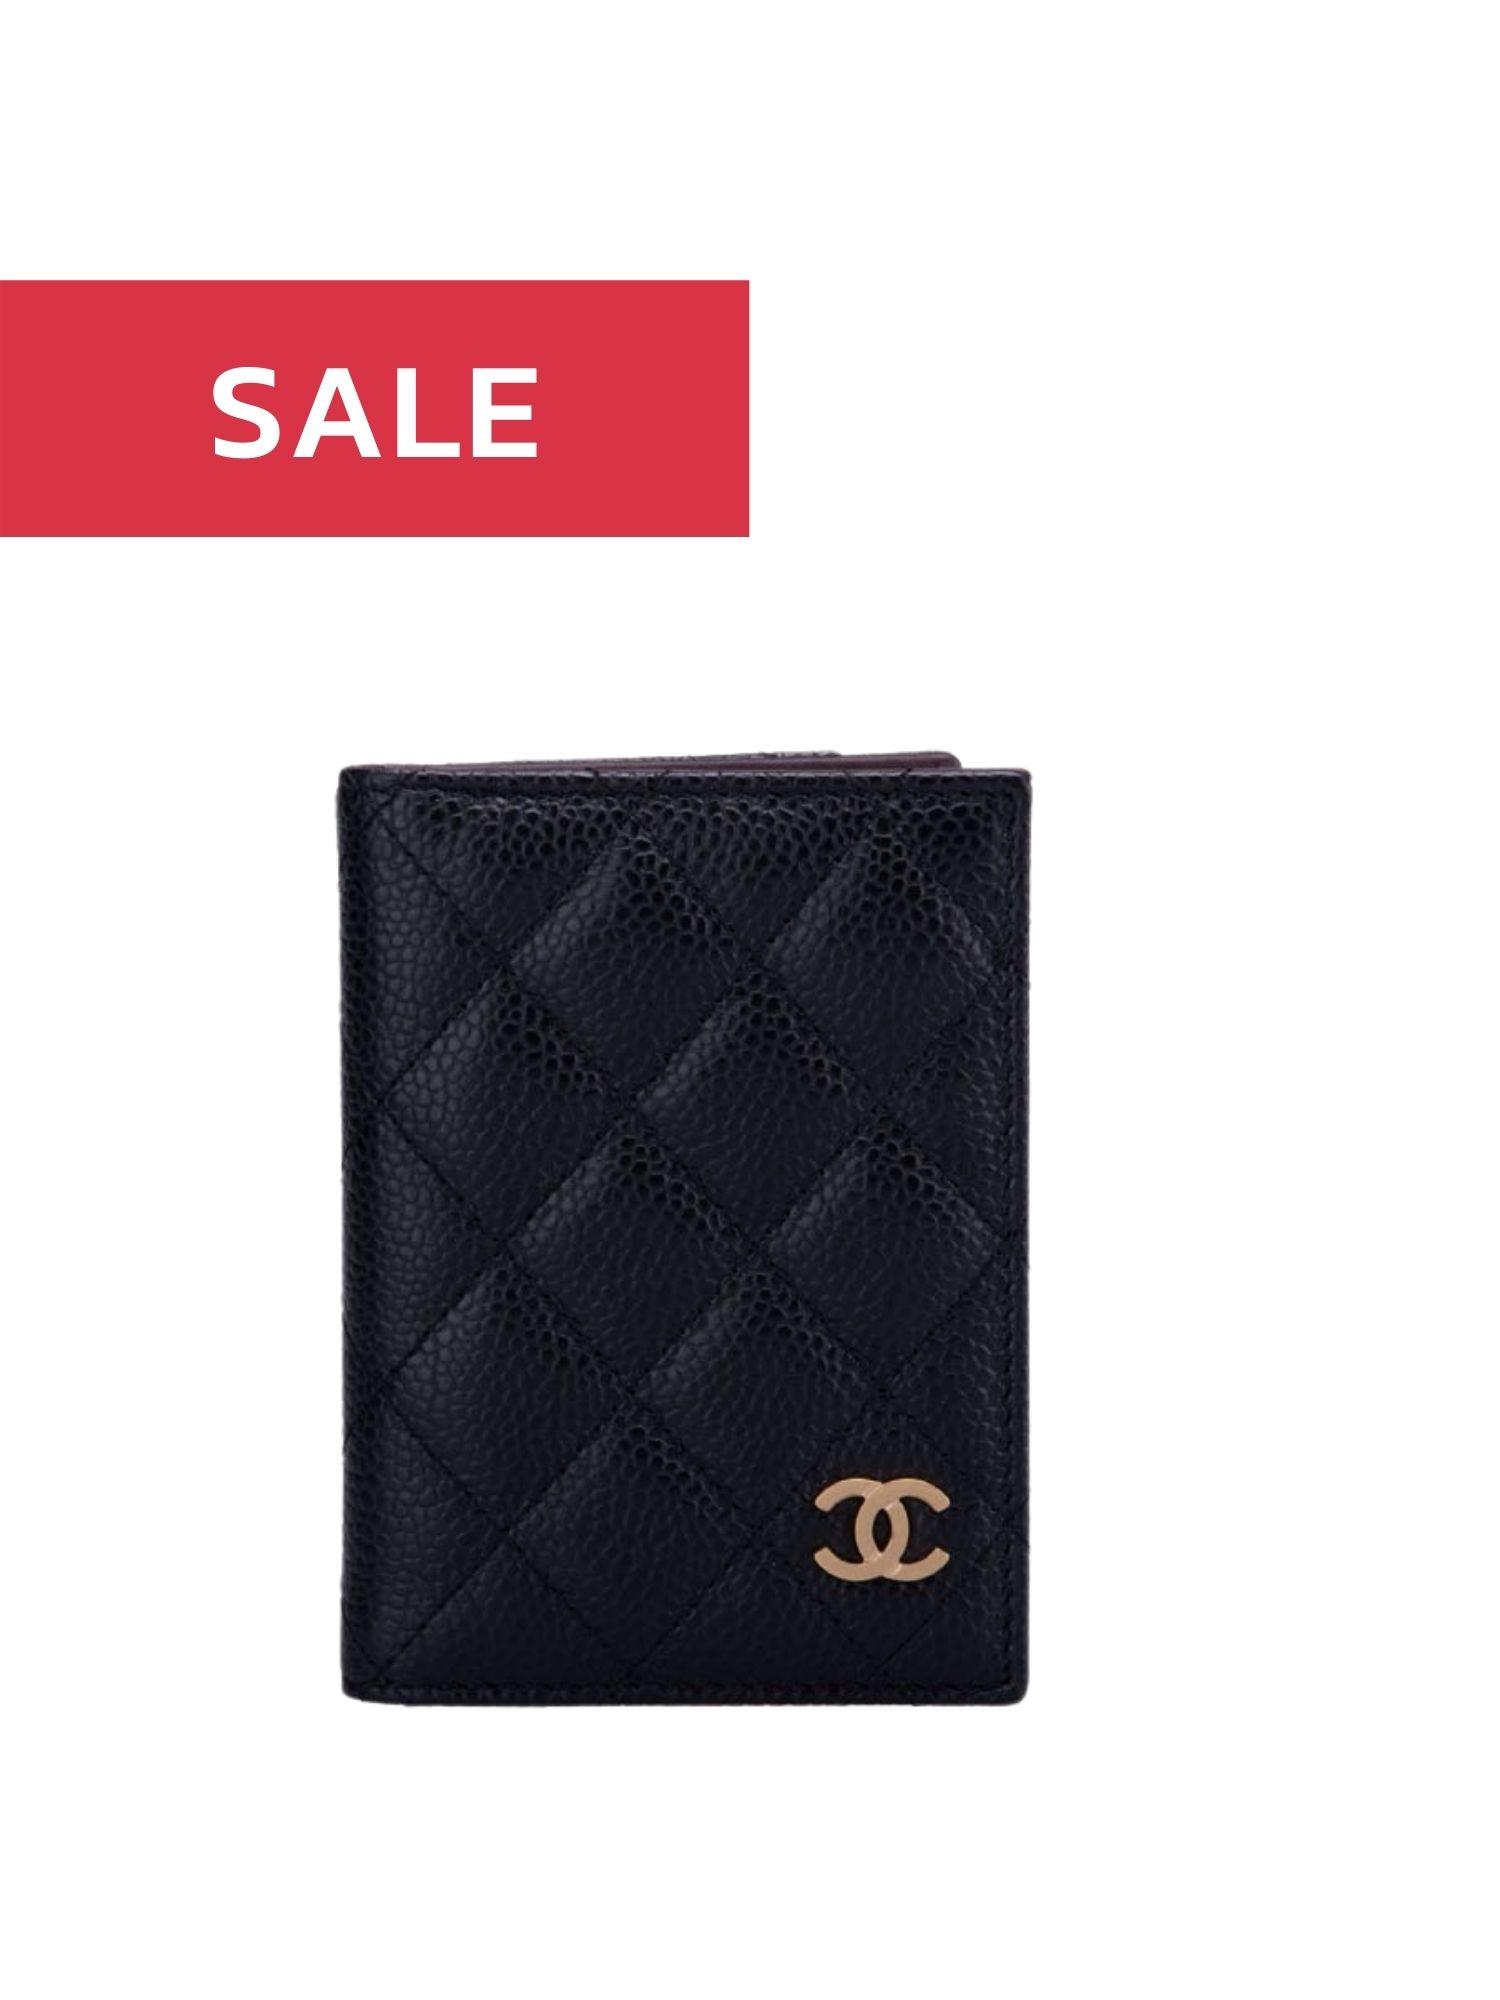 Chanel Caviar Quilted Card Holder Black